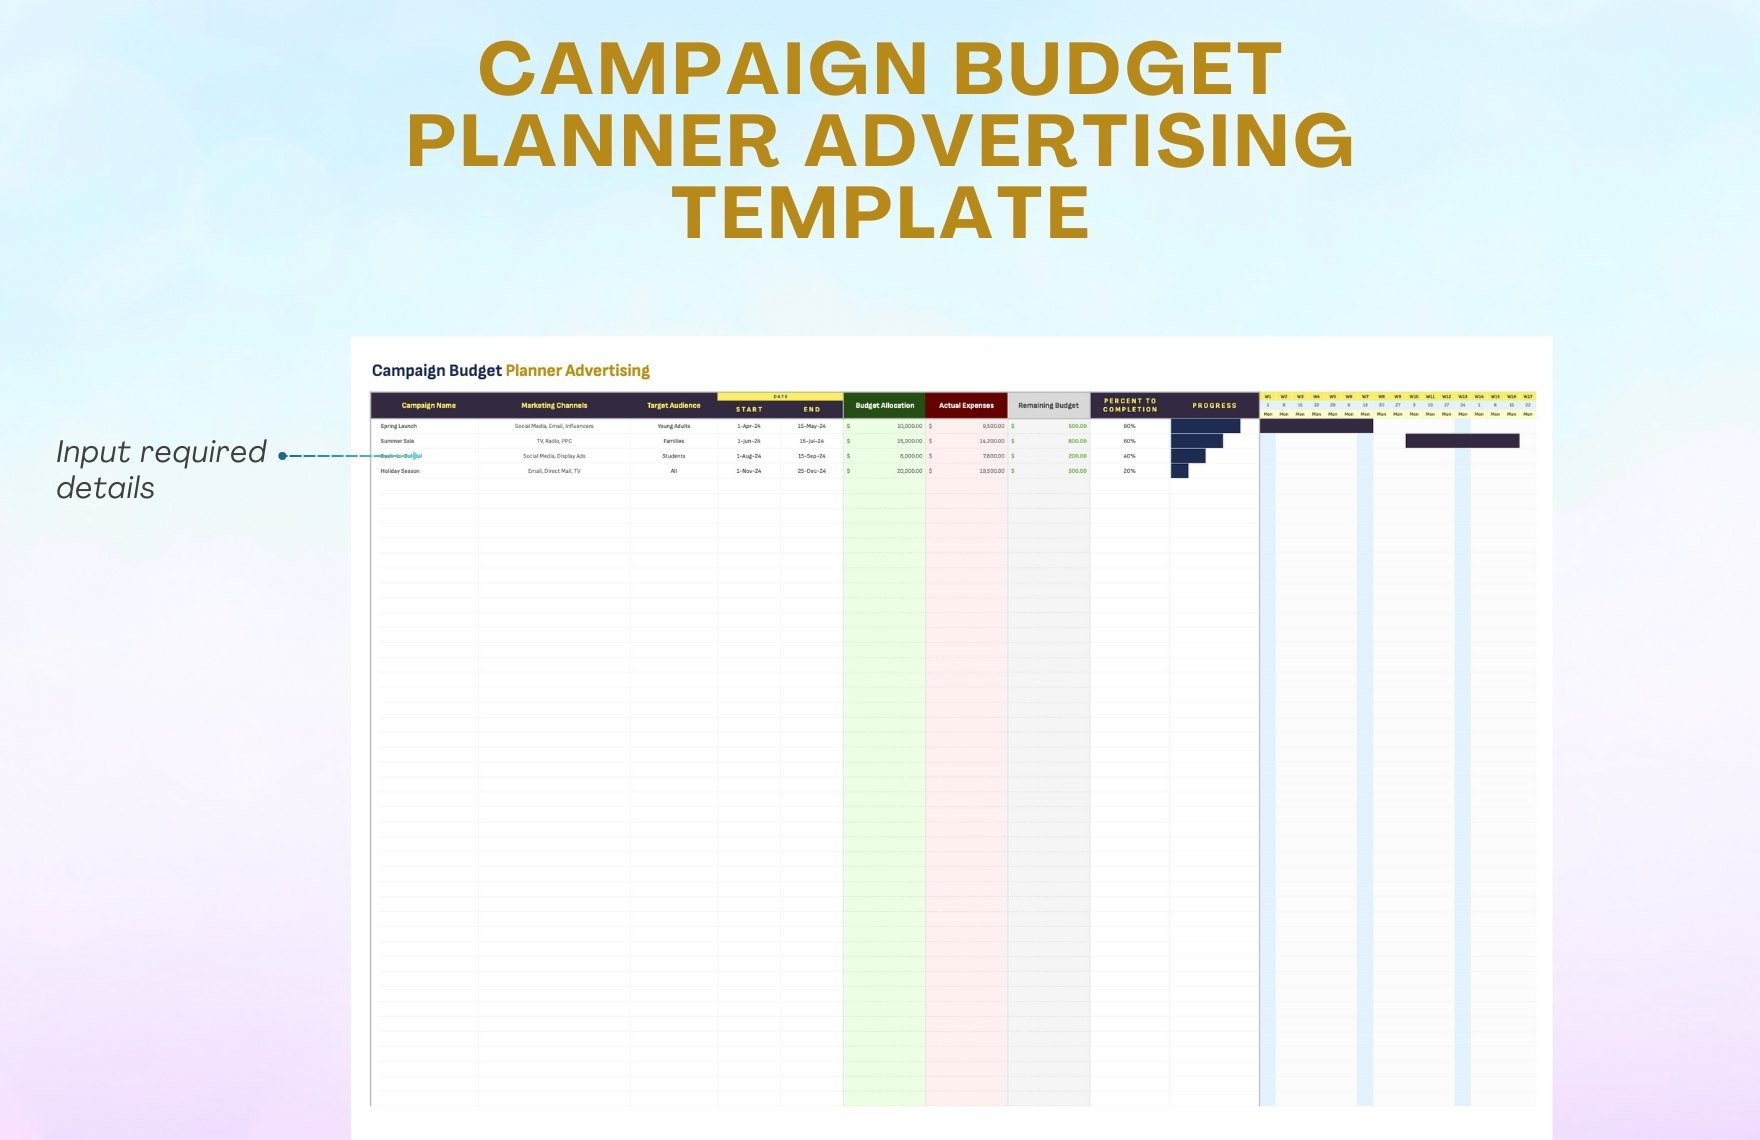 Campaign Budget Planner Advertising Template